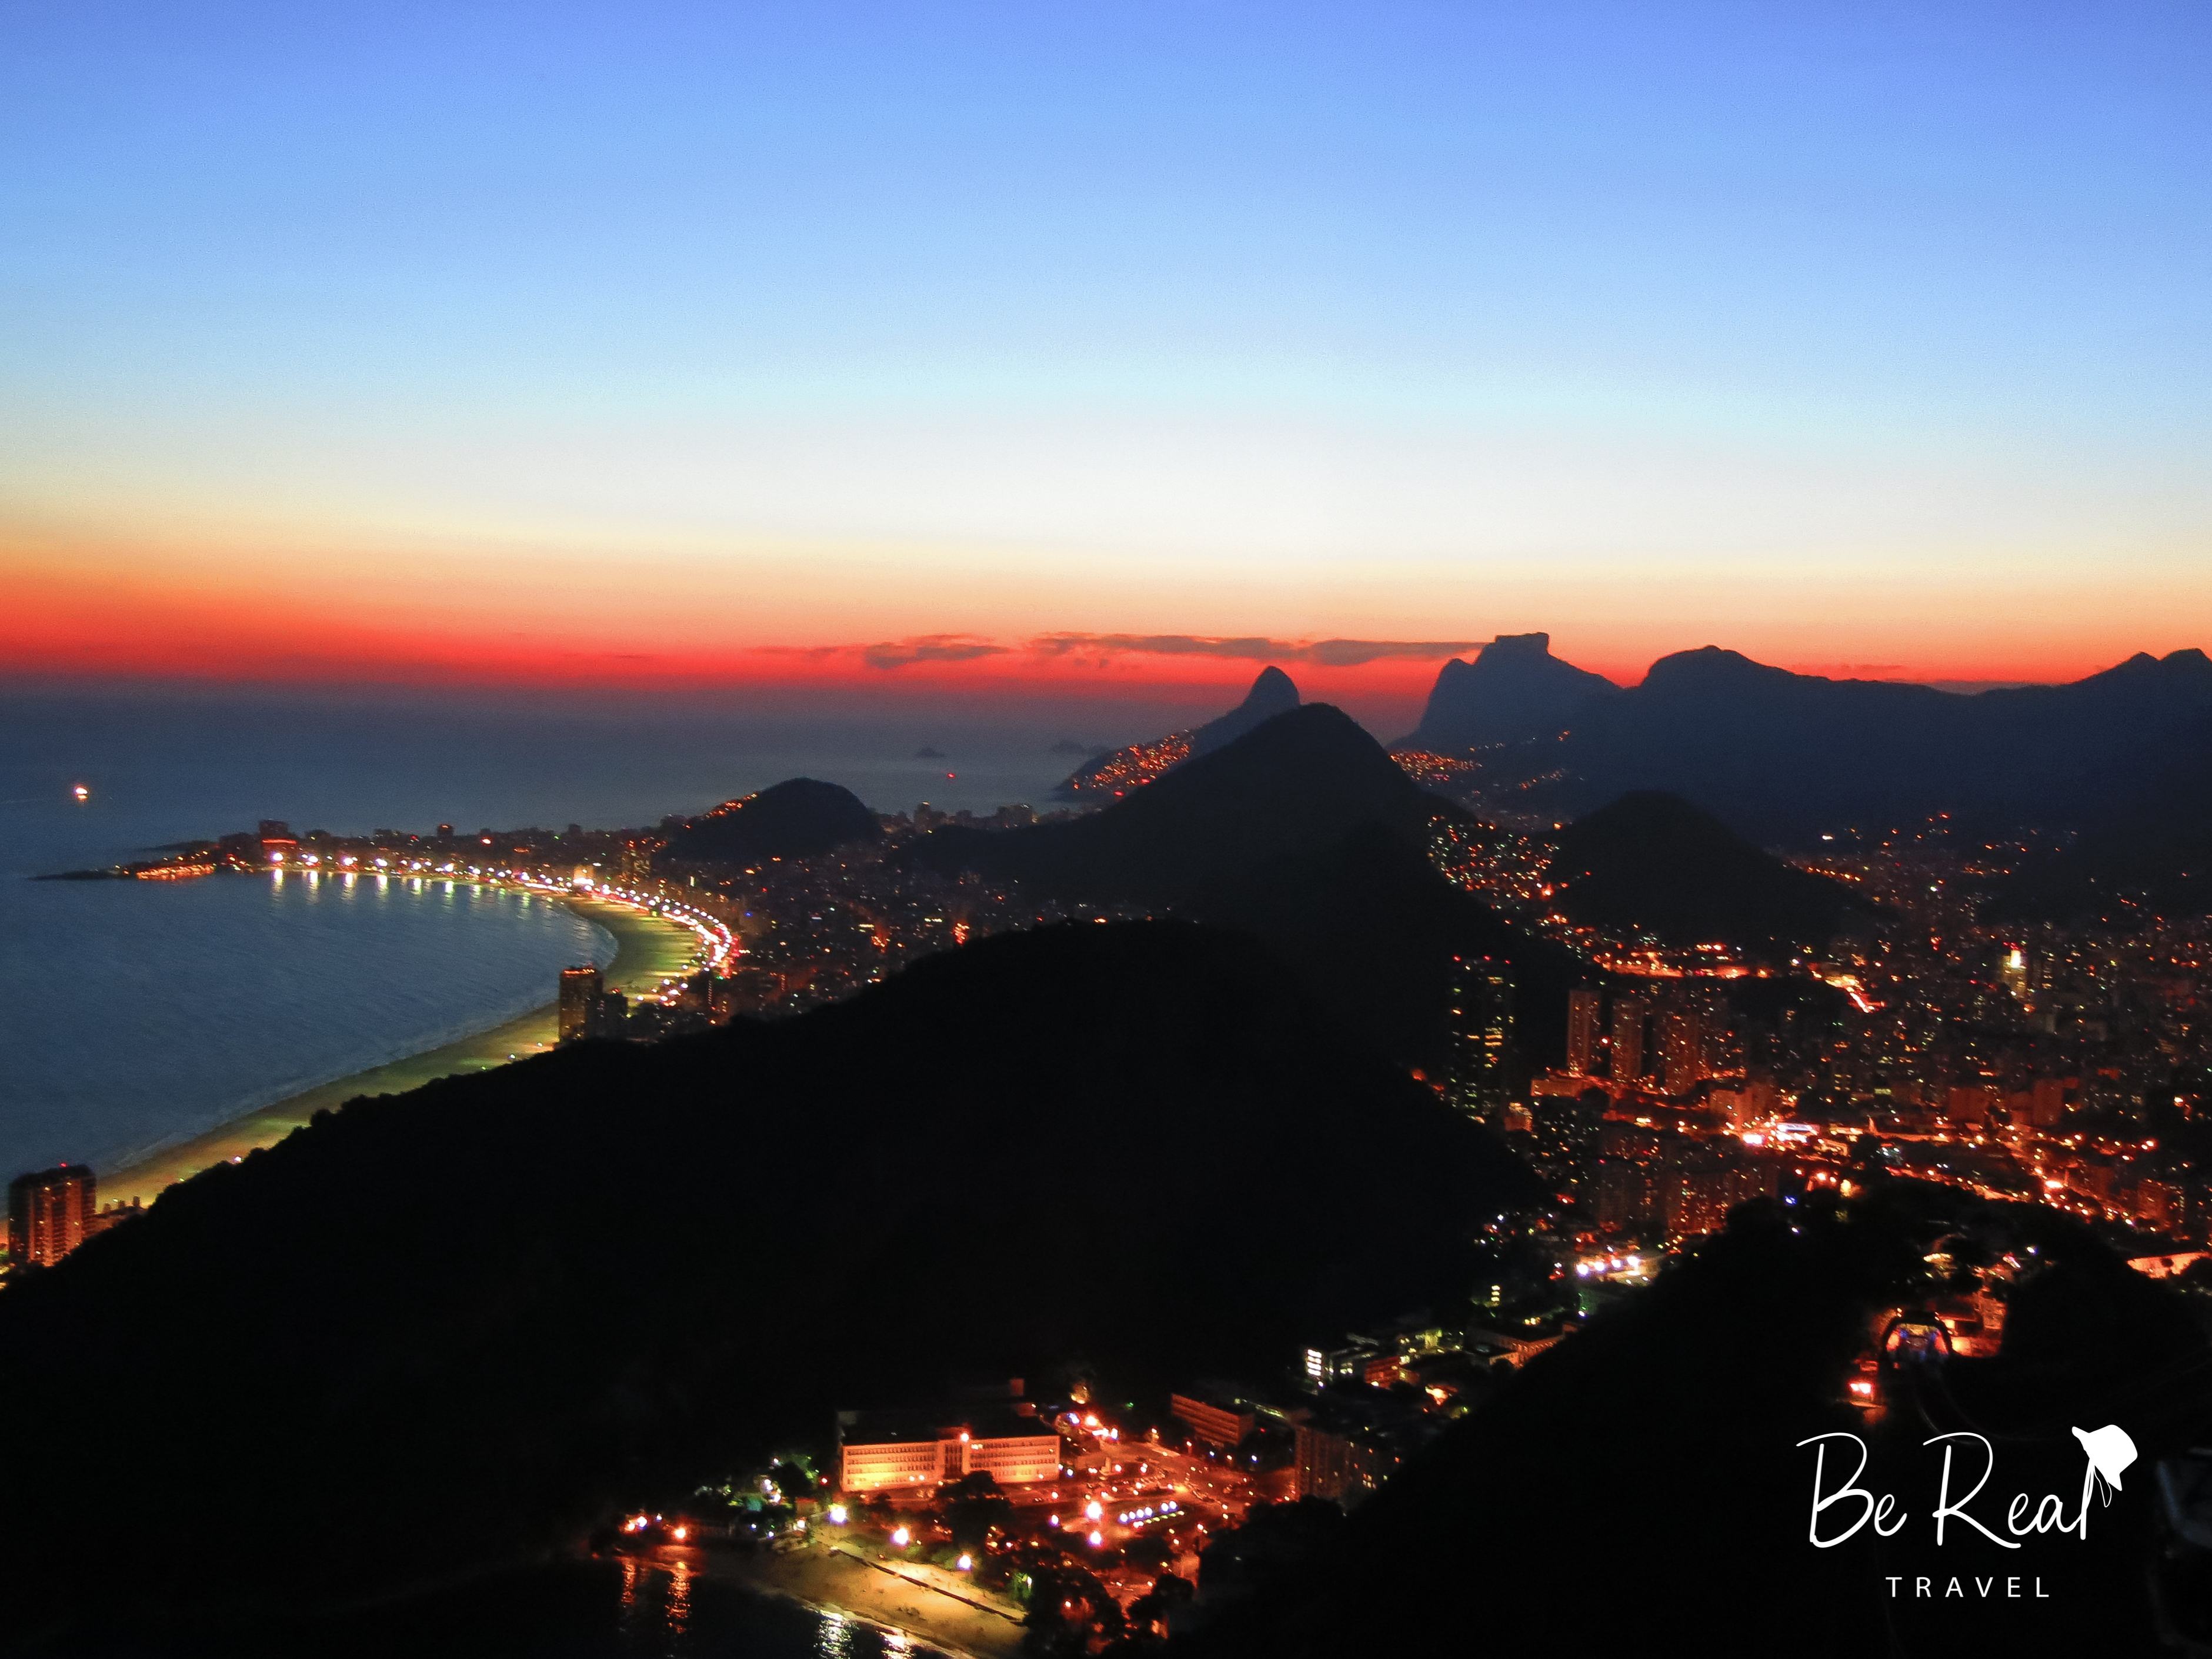 Dusk views like this one are one of the many reasons that Rio de Janeiro is not overrated